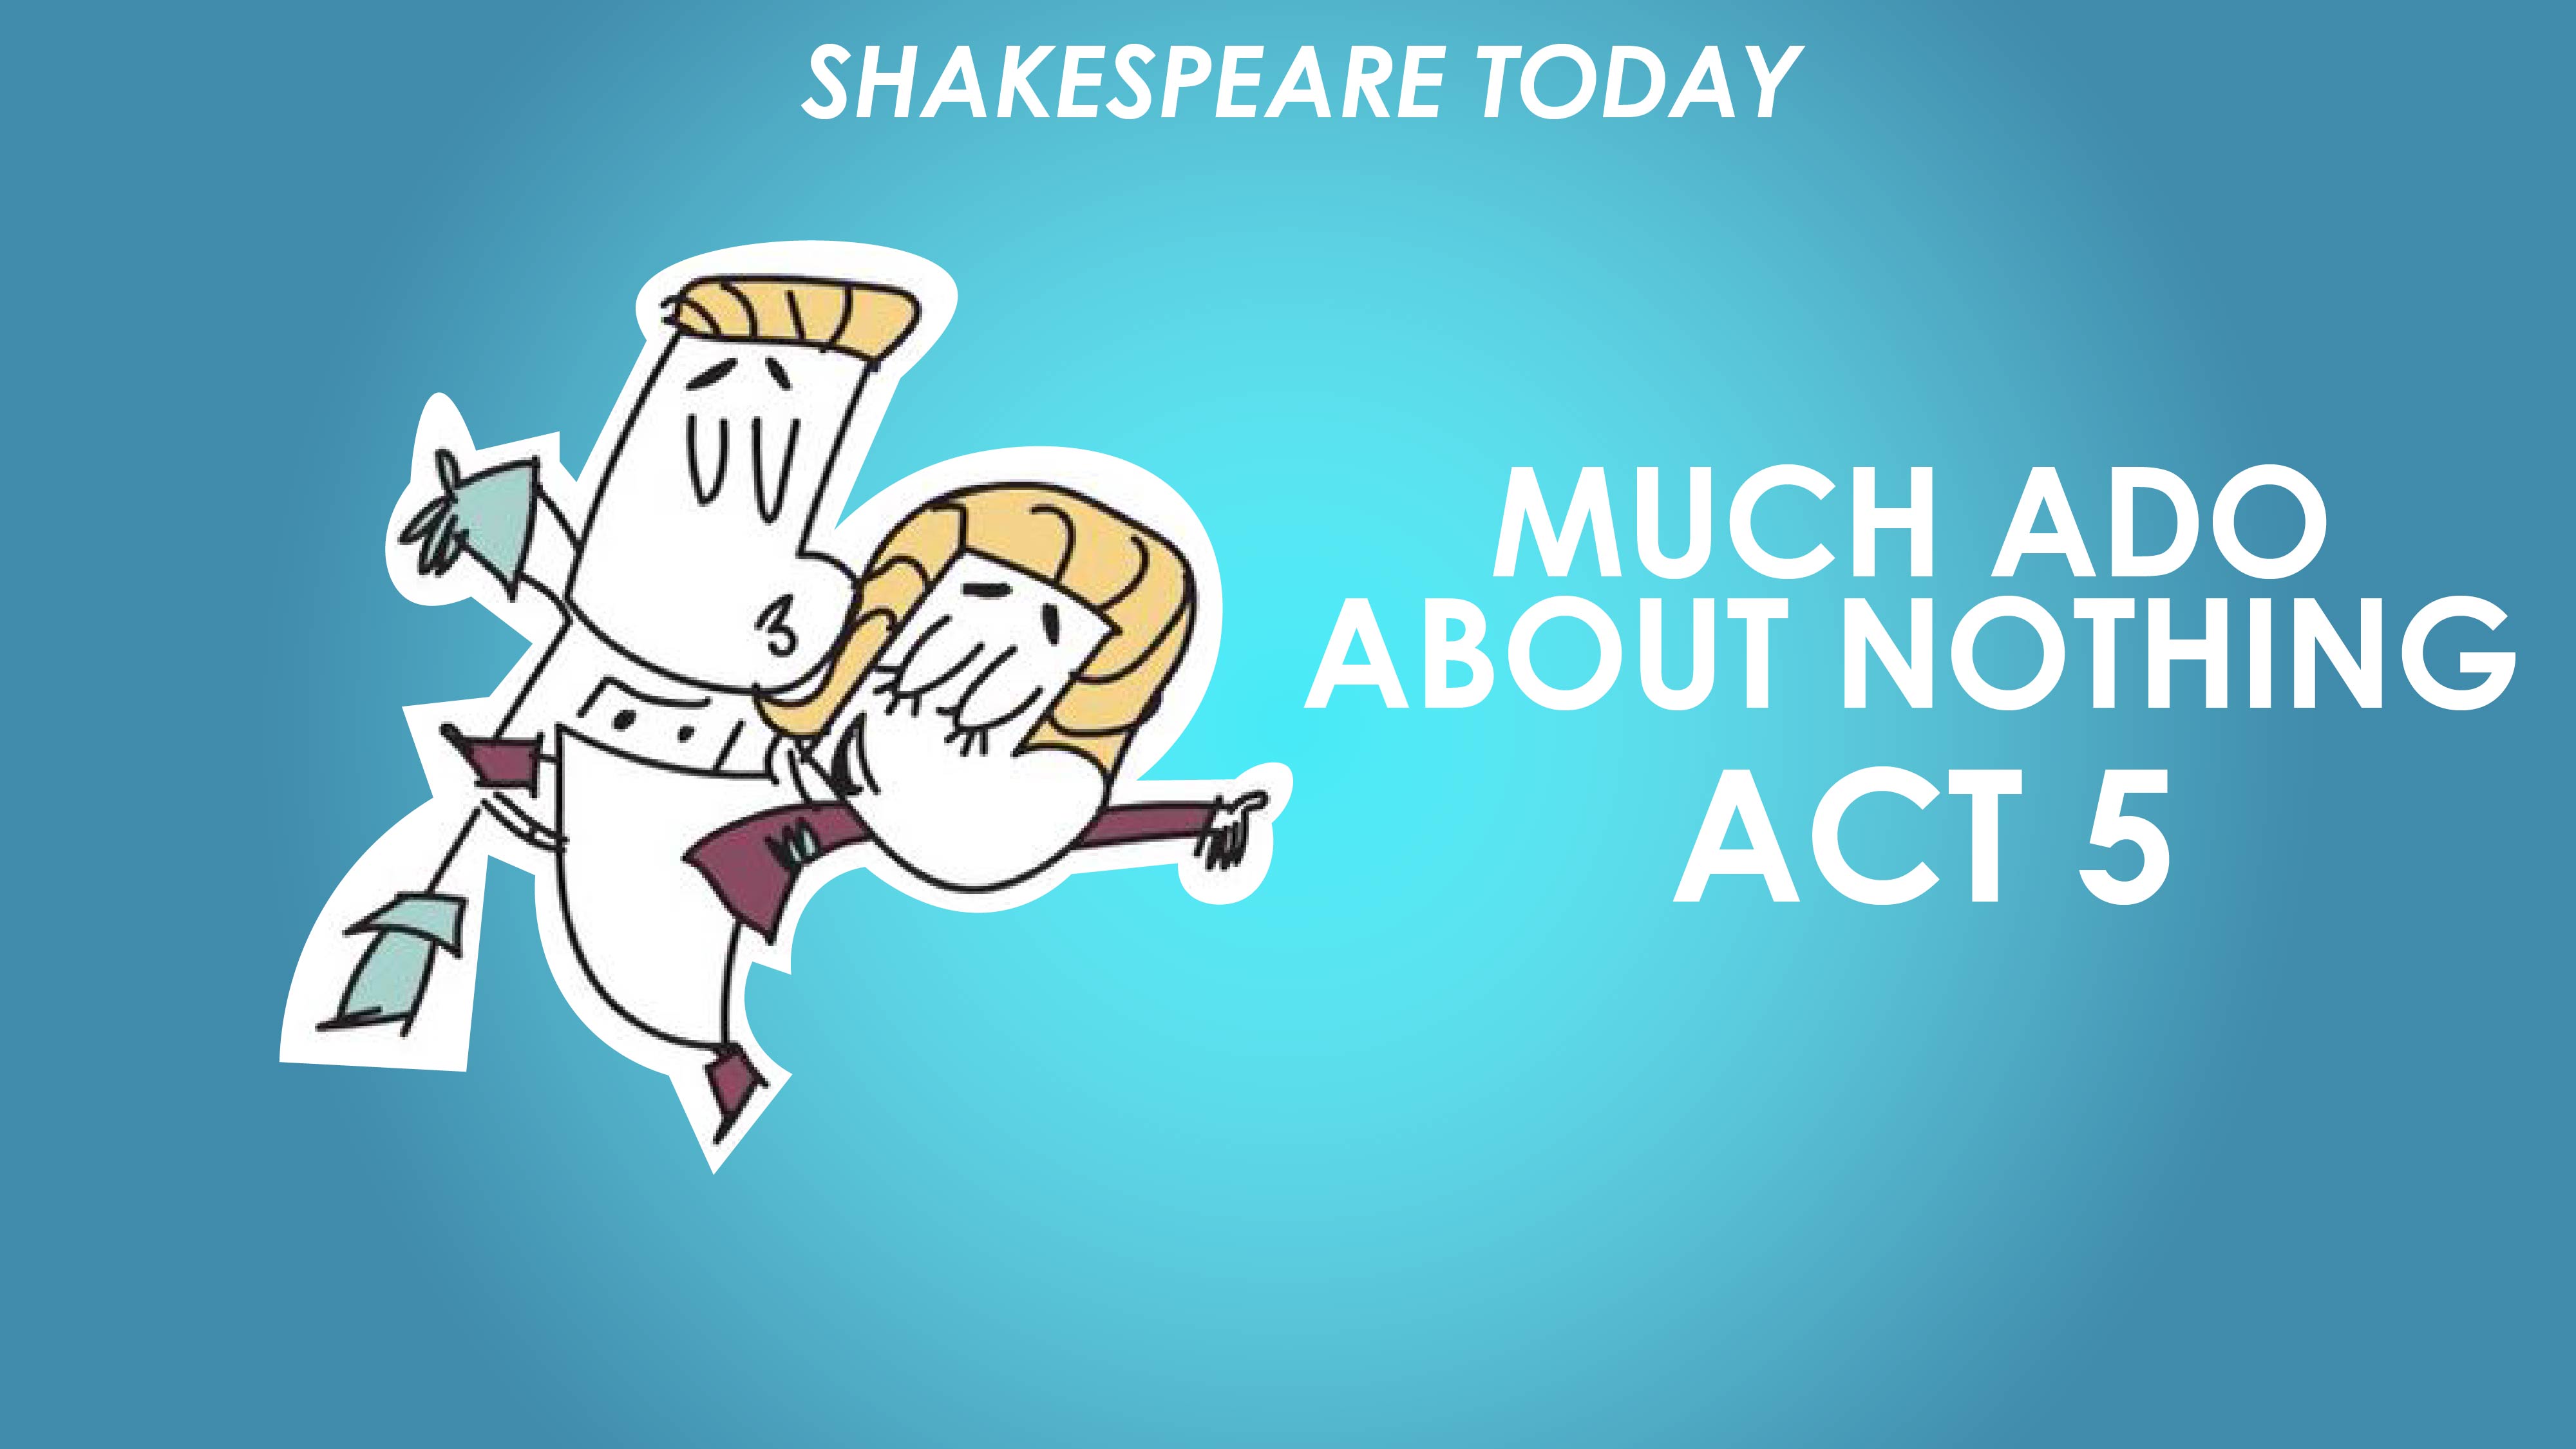 Much Ado About Nothing Act 5 - Shakespeare Today Series